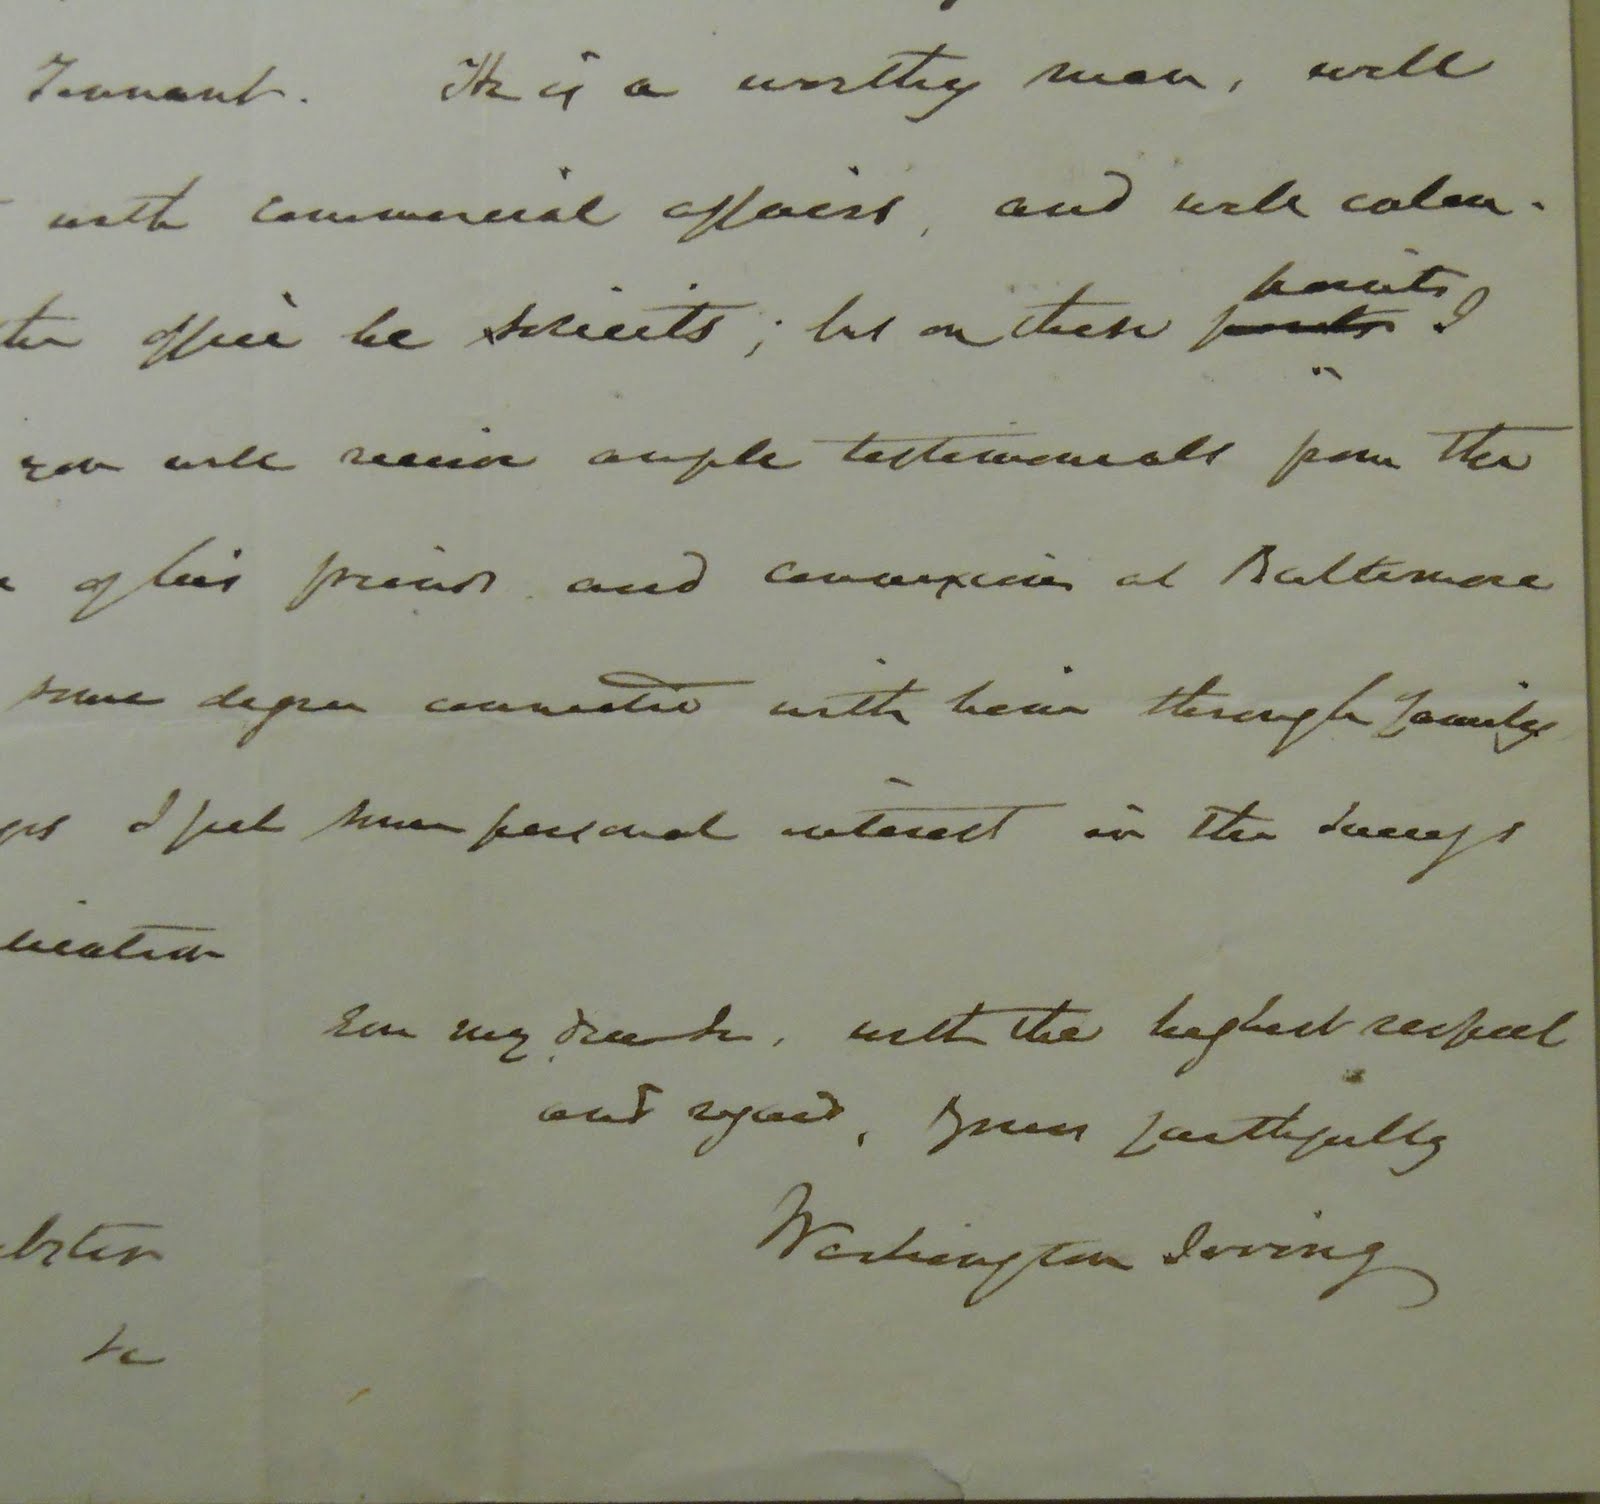 Excerpt of a letter from Washington Irving to Daniel Webster showing the signature.